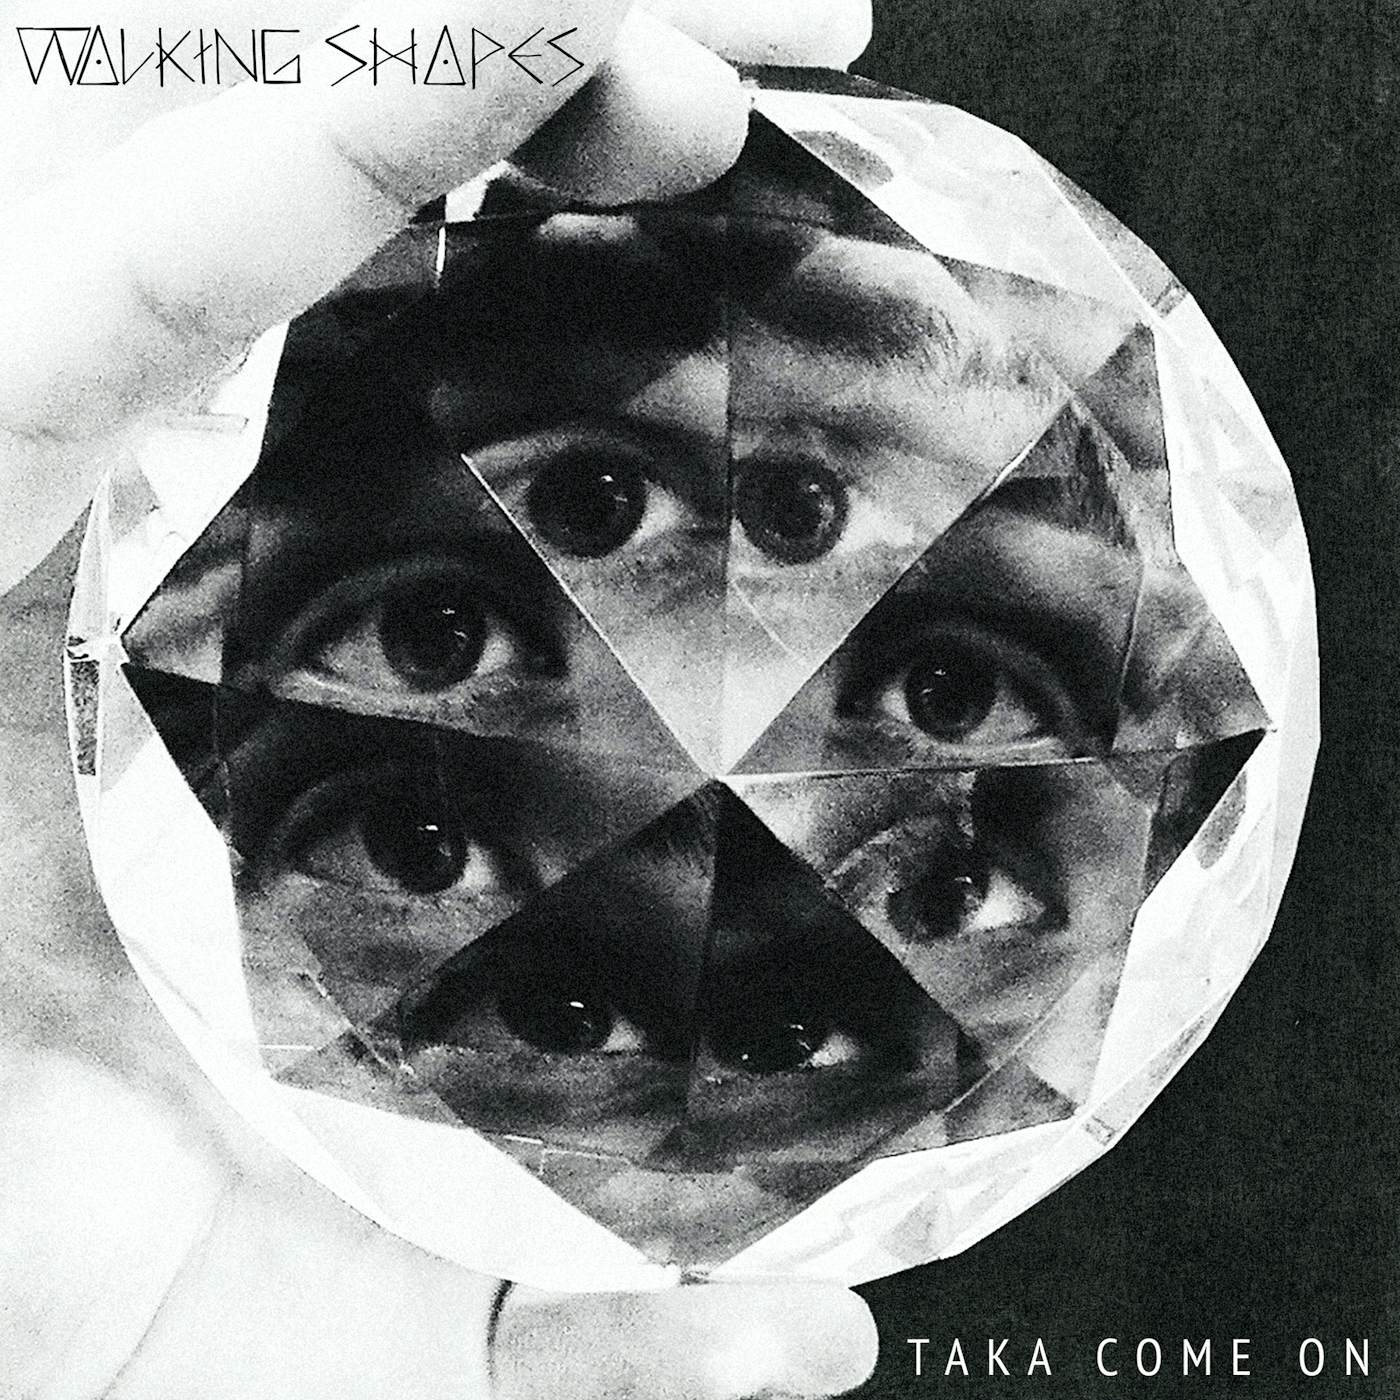 Walking Shapes Taka Come On Vinyl Record